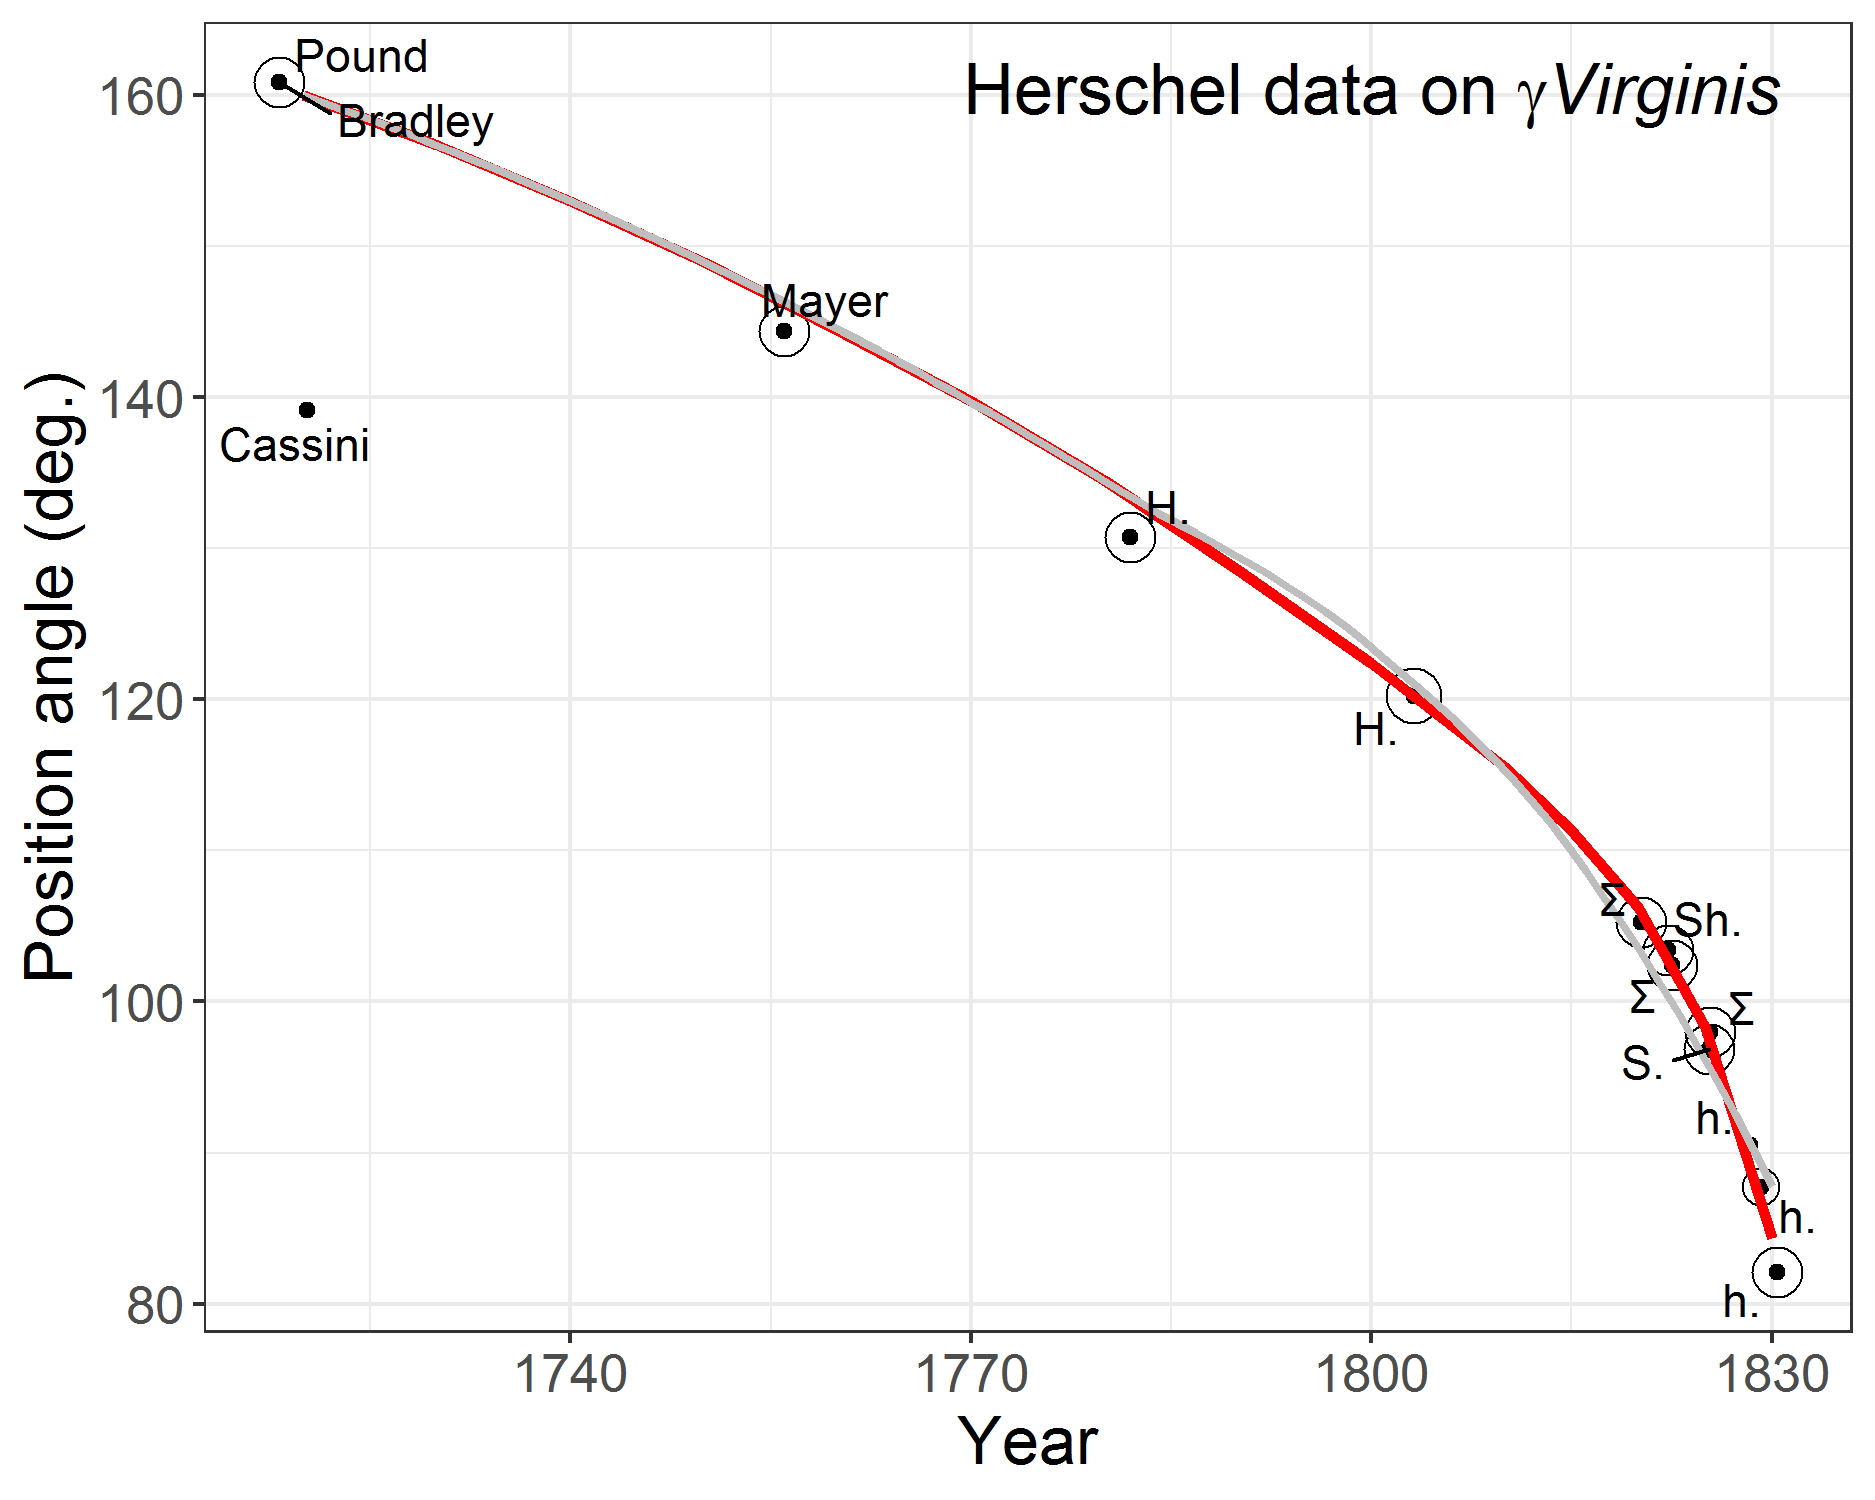 Herschel redone: Reconstruction of Herschel’s graph of data on the orbits of <U+03B3> Virginis together with his eye-smoothed, interpolated curve (light gray) and a loess smoothed curve (dark gray). Circles around each data point are of area proportional to Herschel’s weight for the observation.